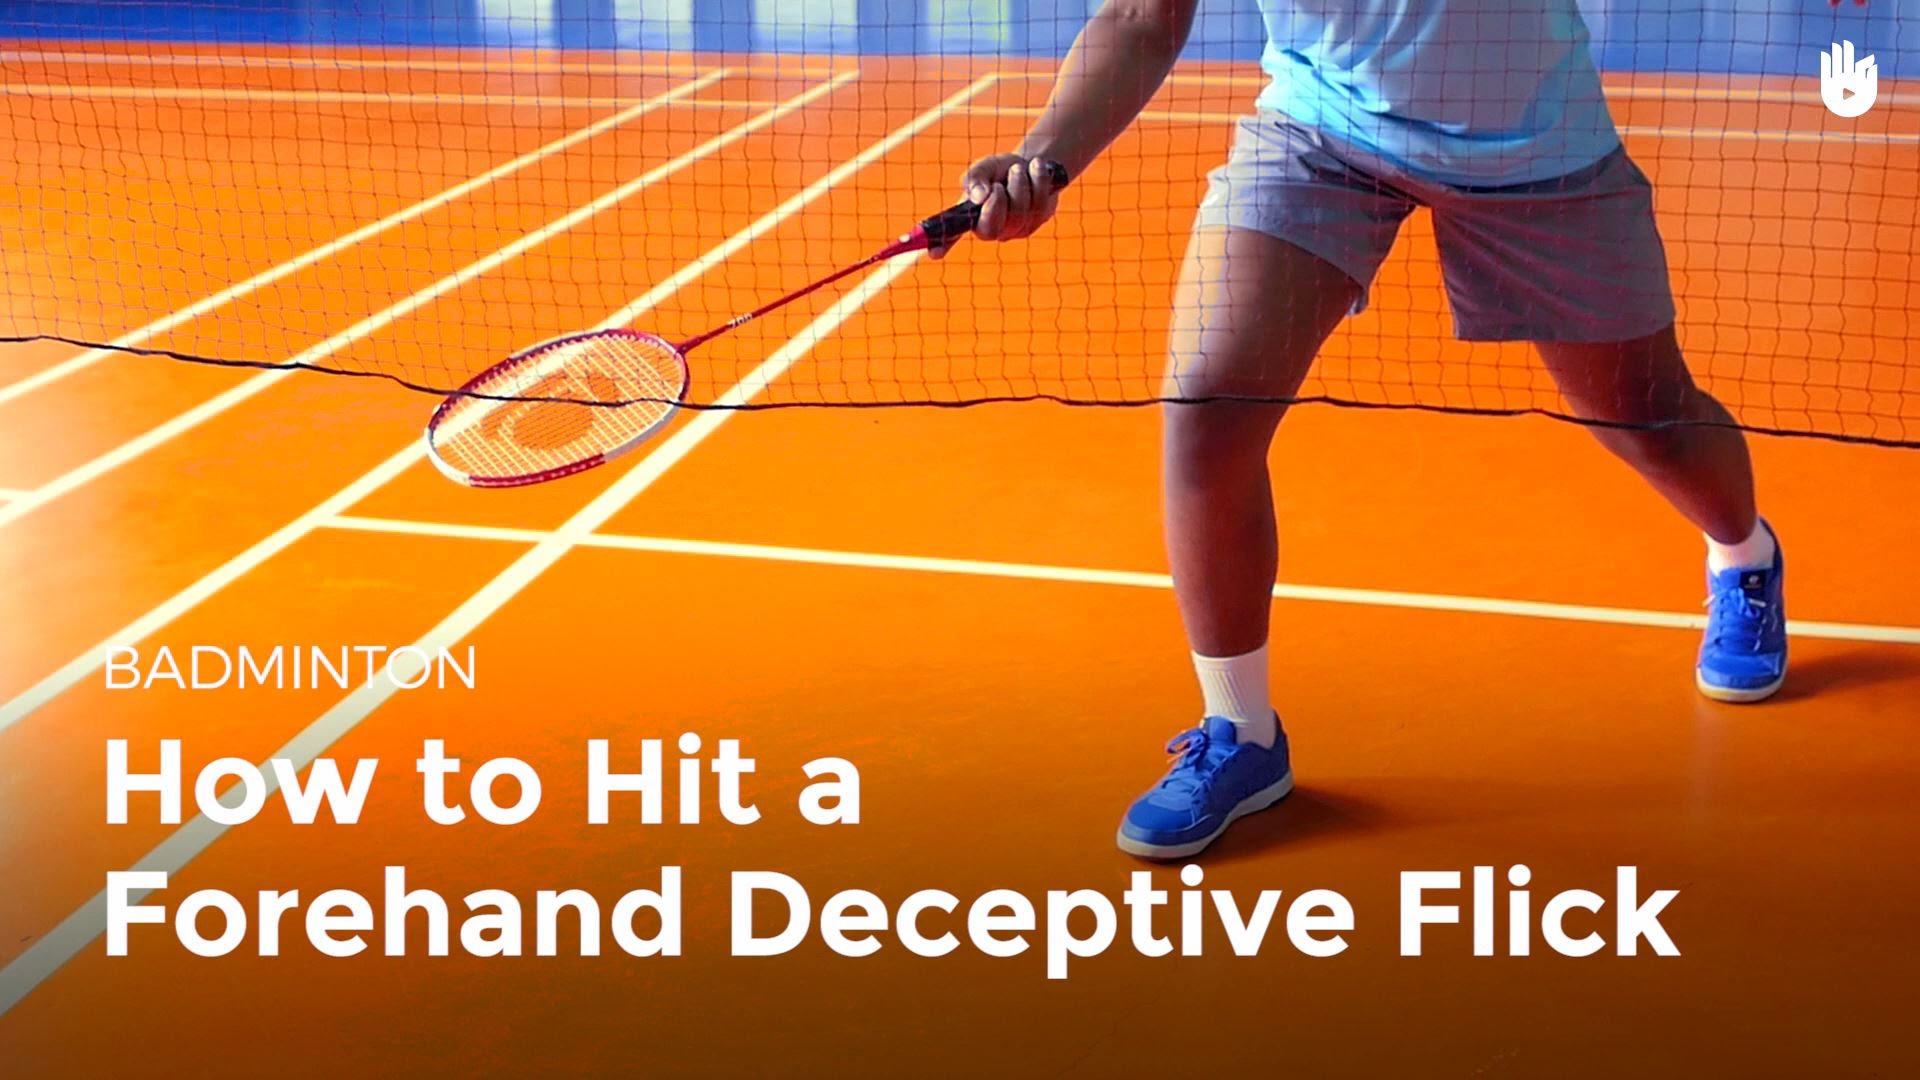 How to Hit a Forehand Deceptive Flick | Badminton - YouTube